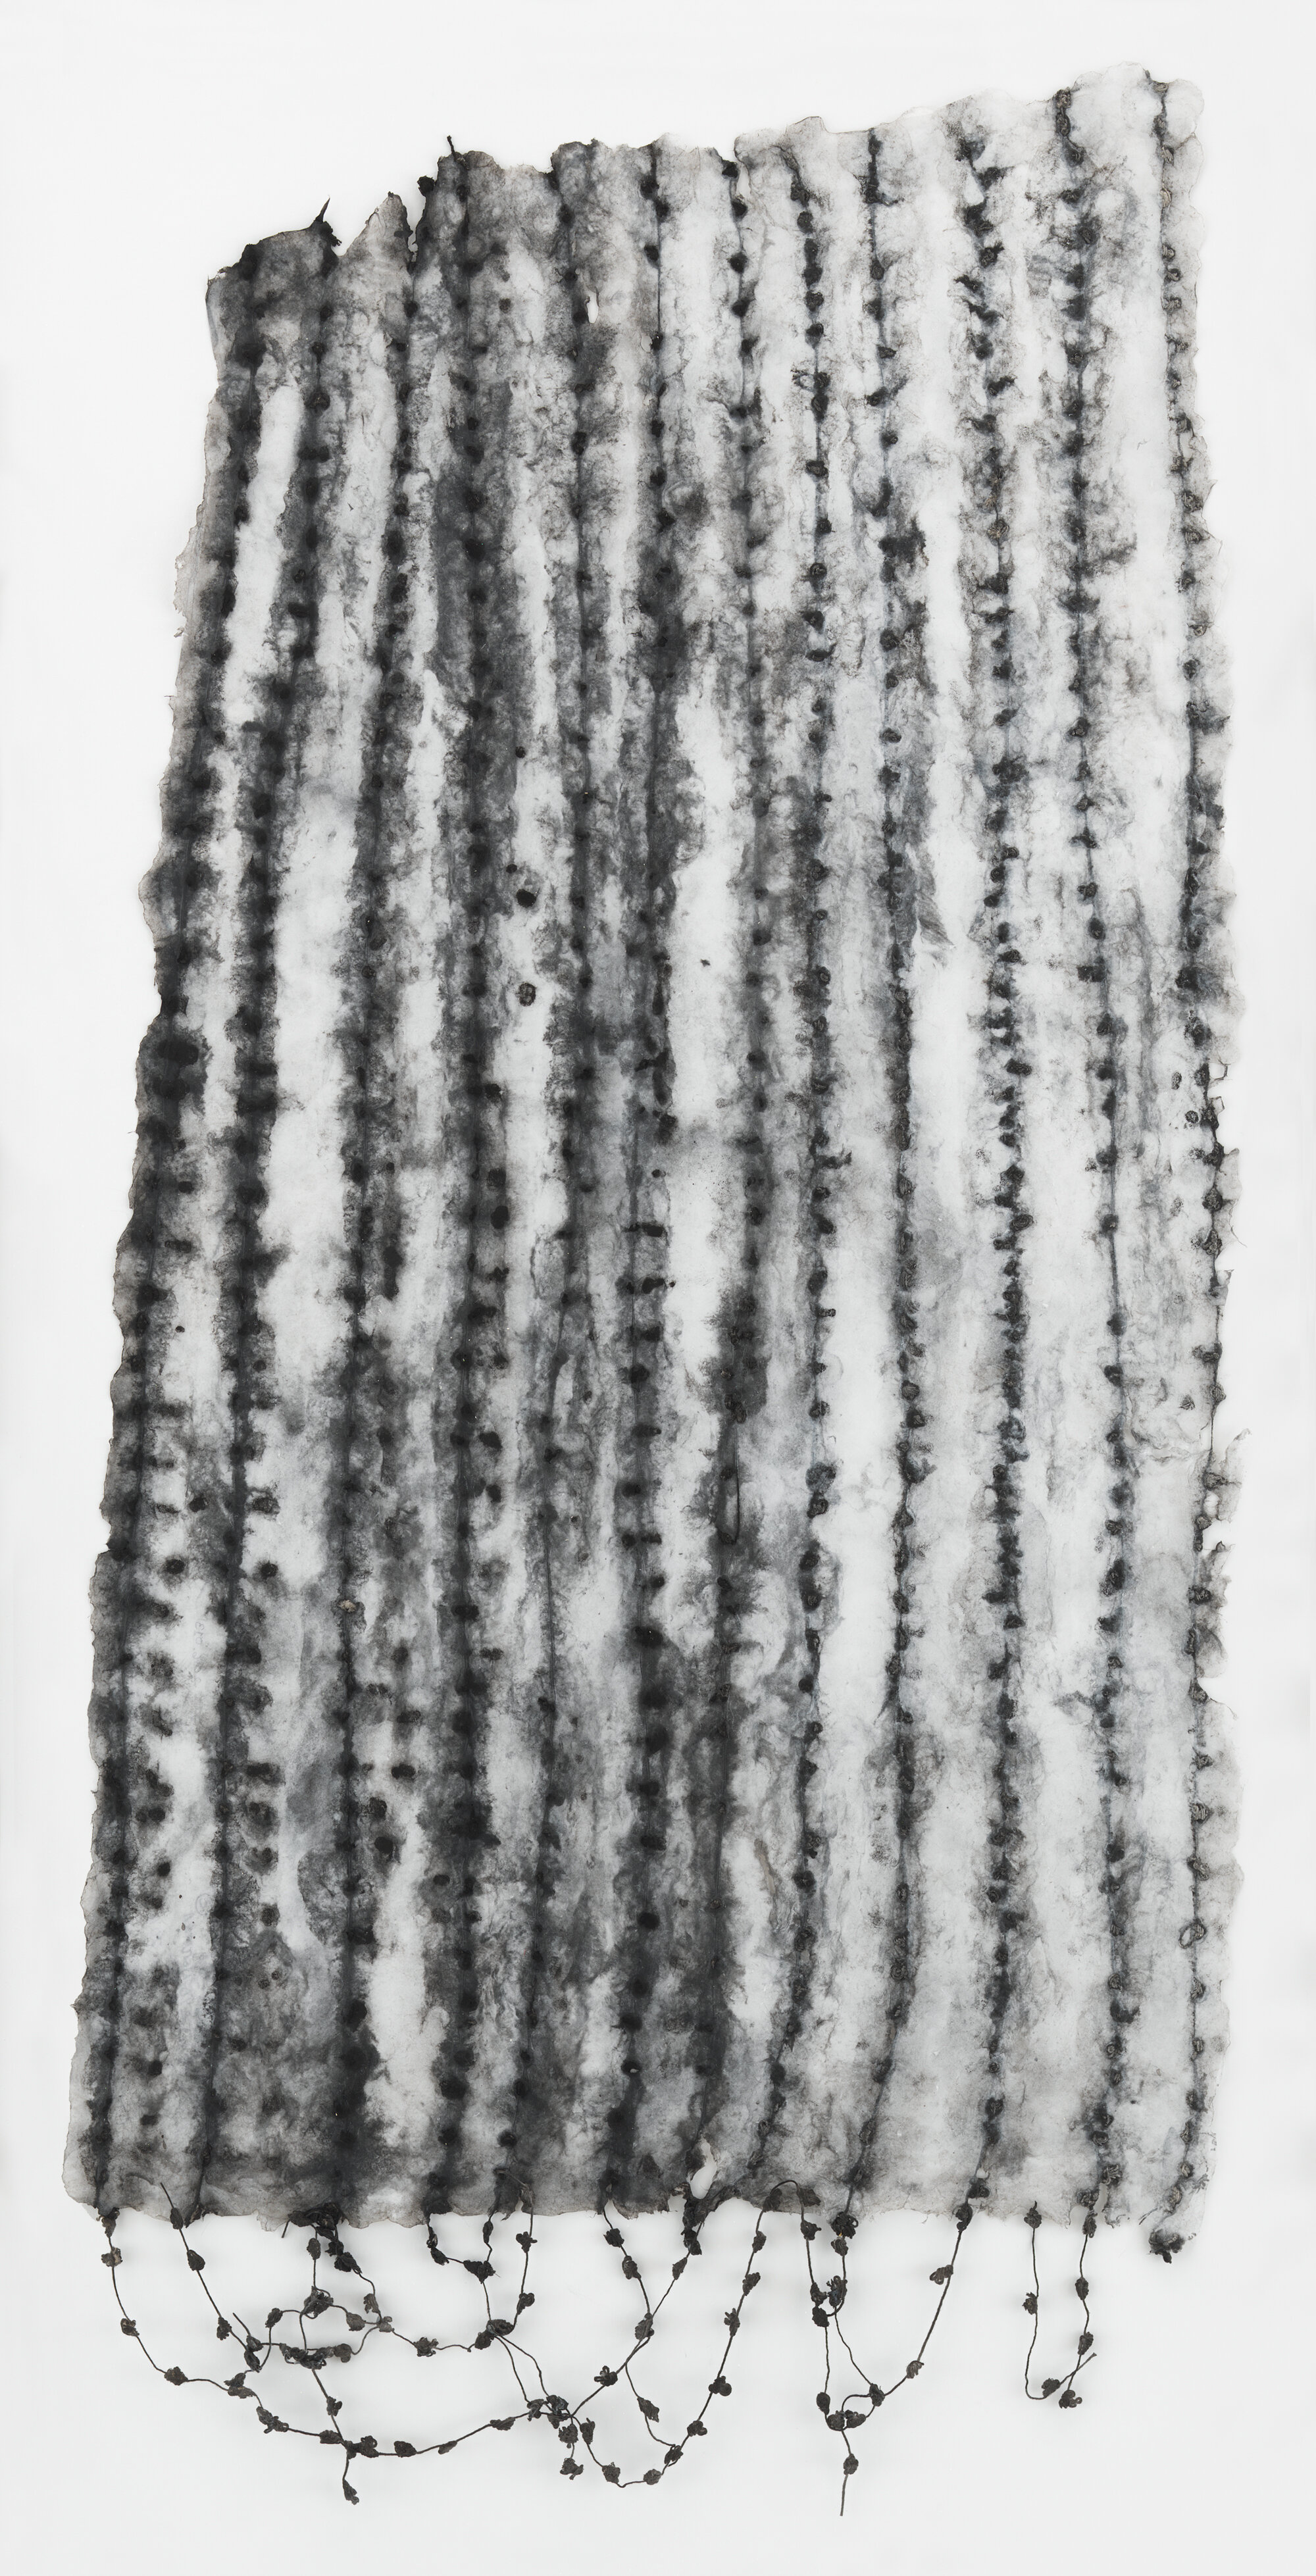   Untitled , 2016 Pigment, thread, and linen handmade paper 43 x 19 in. Framed Dimensions: 45.25 x 23.375 x 1.5 in. 